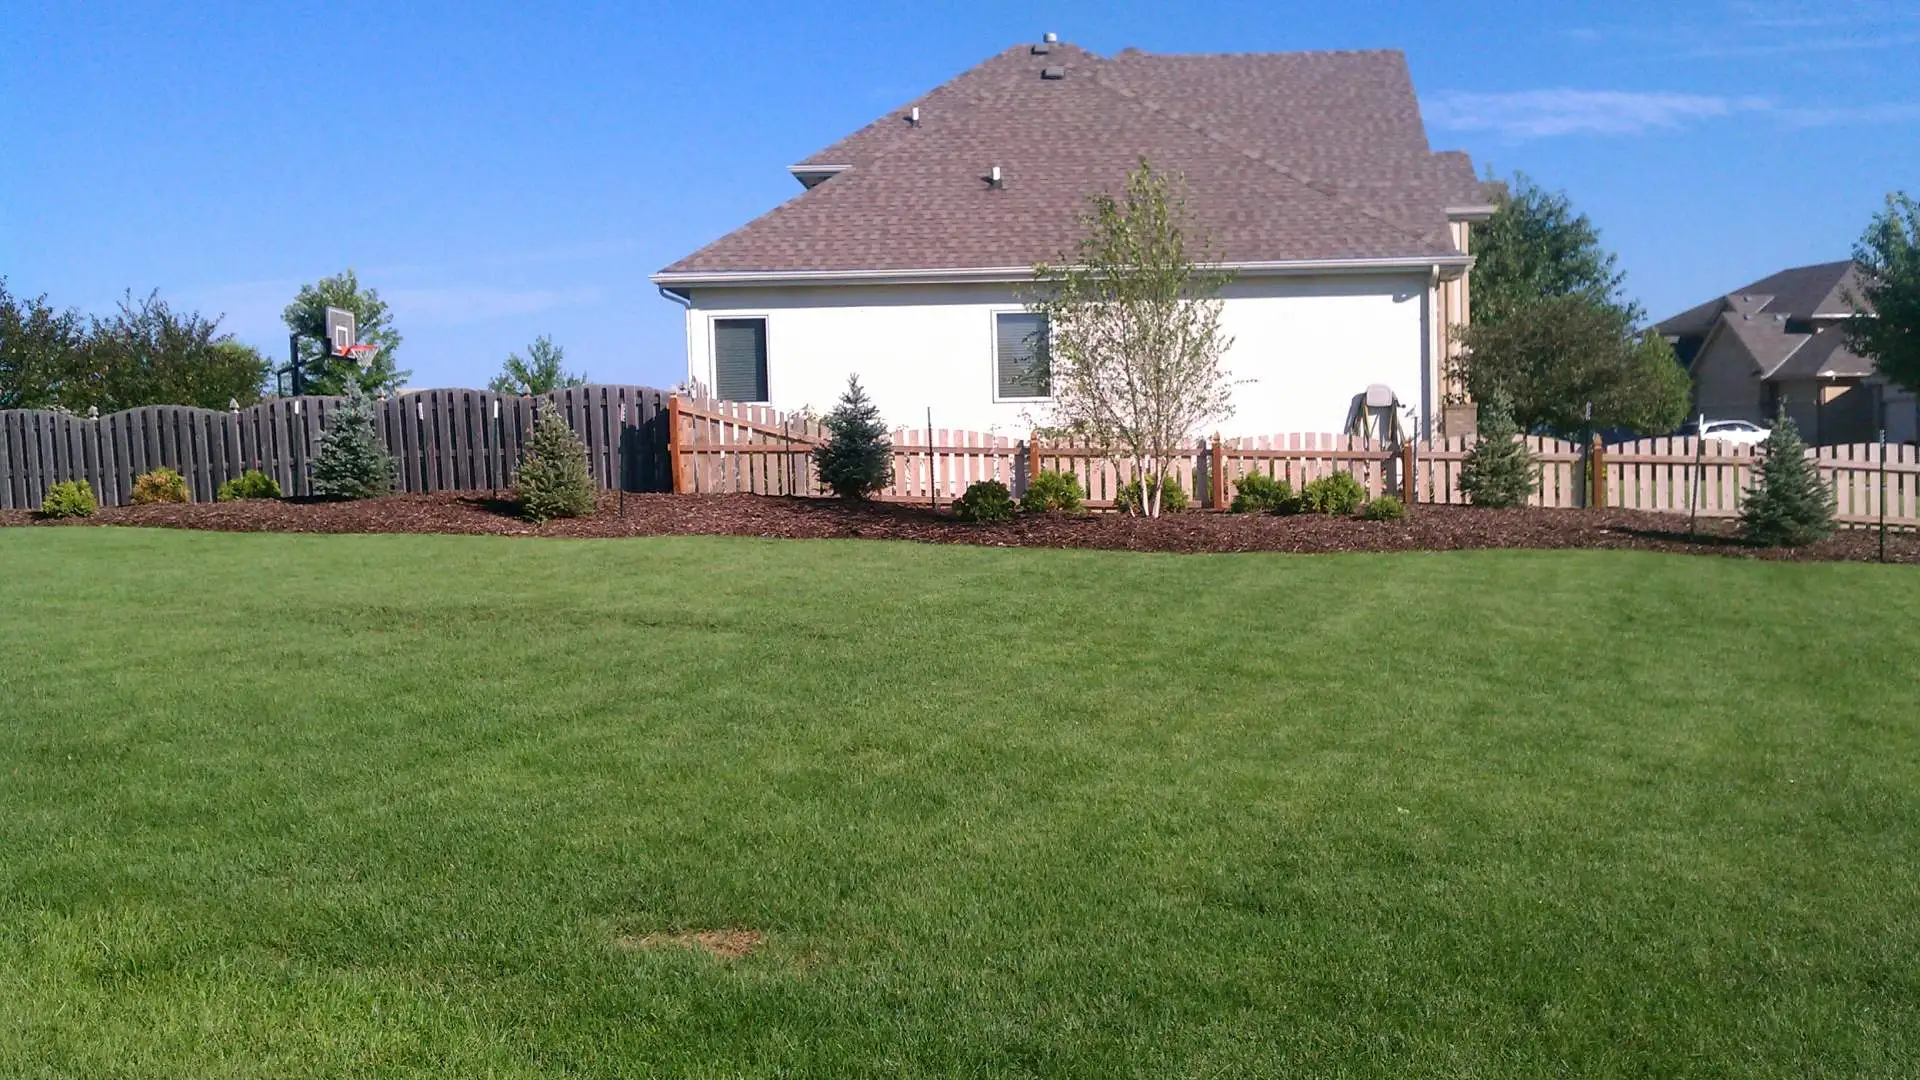 A freshly mowed lawn for a home in Omaha, NE.